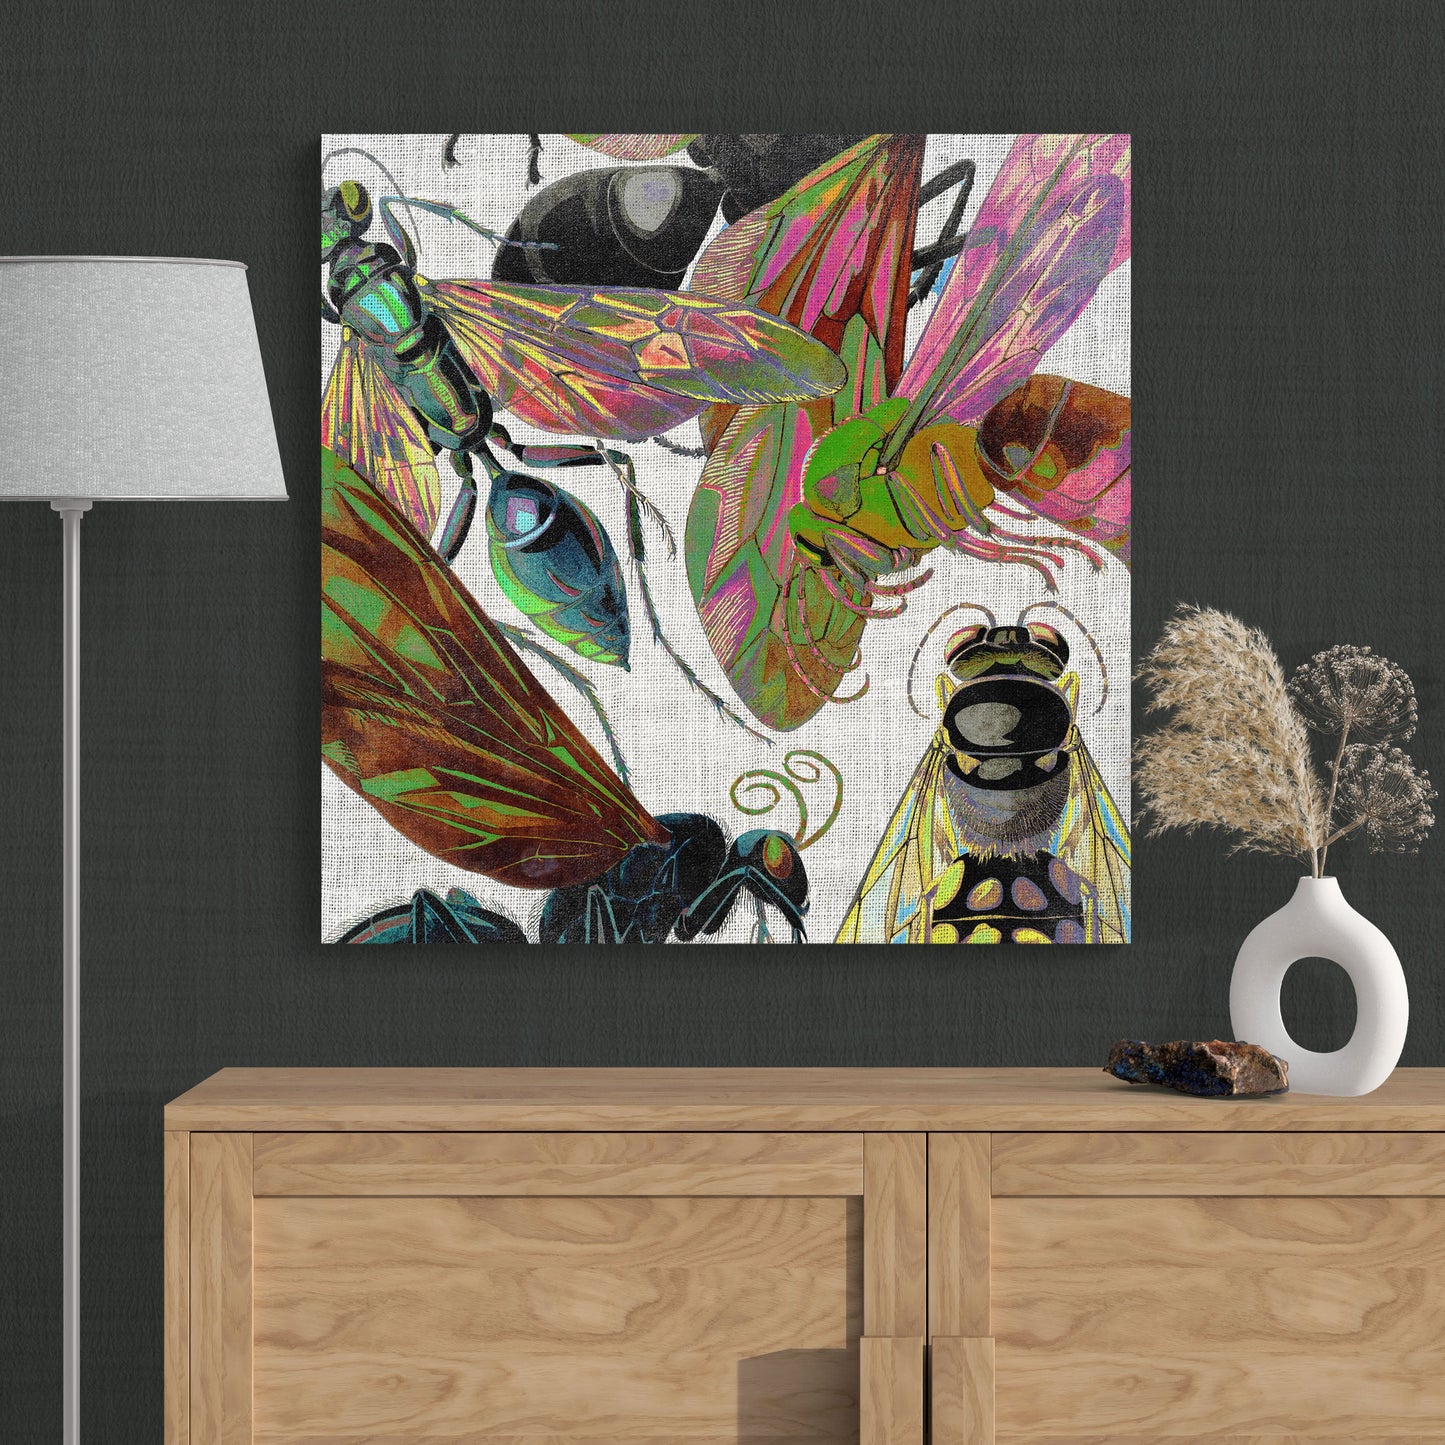 Abstract Insects Wasp Collage 2 - Colorful Nature Canvas Wall Art - Retro Reverence